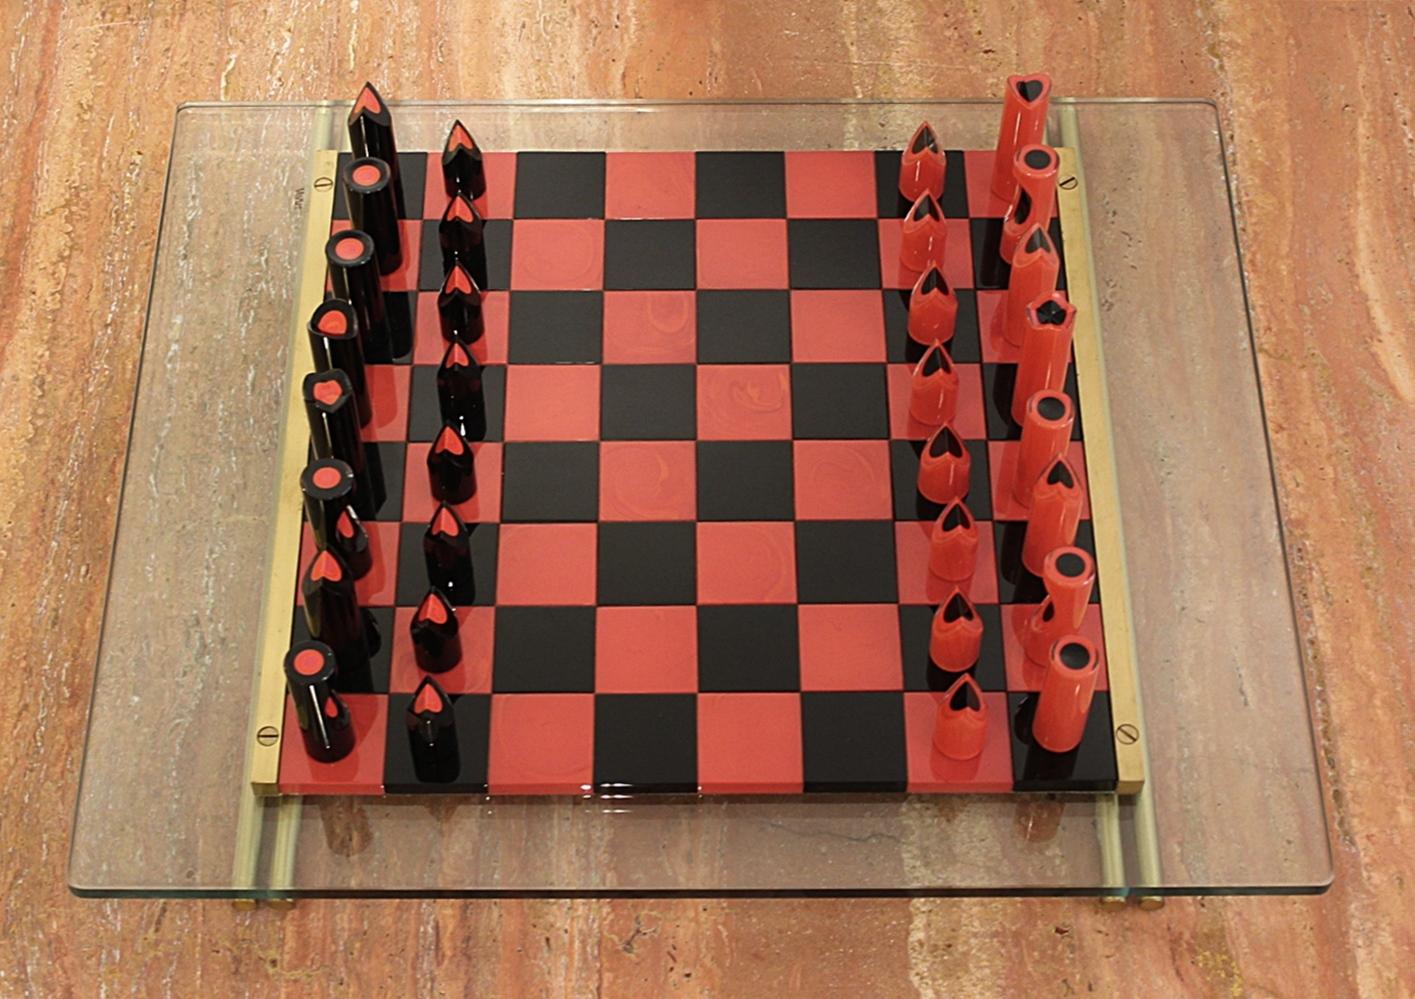 Murano glass chess game by Mario Ticco for VeArt, Italy, 1983.